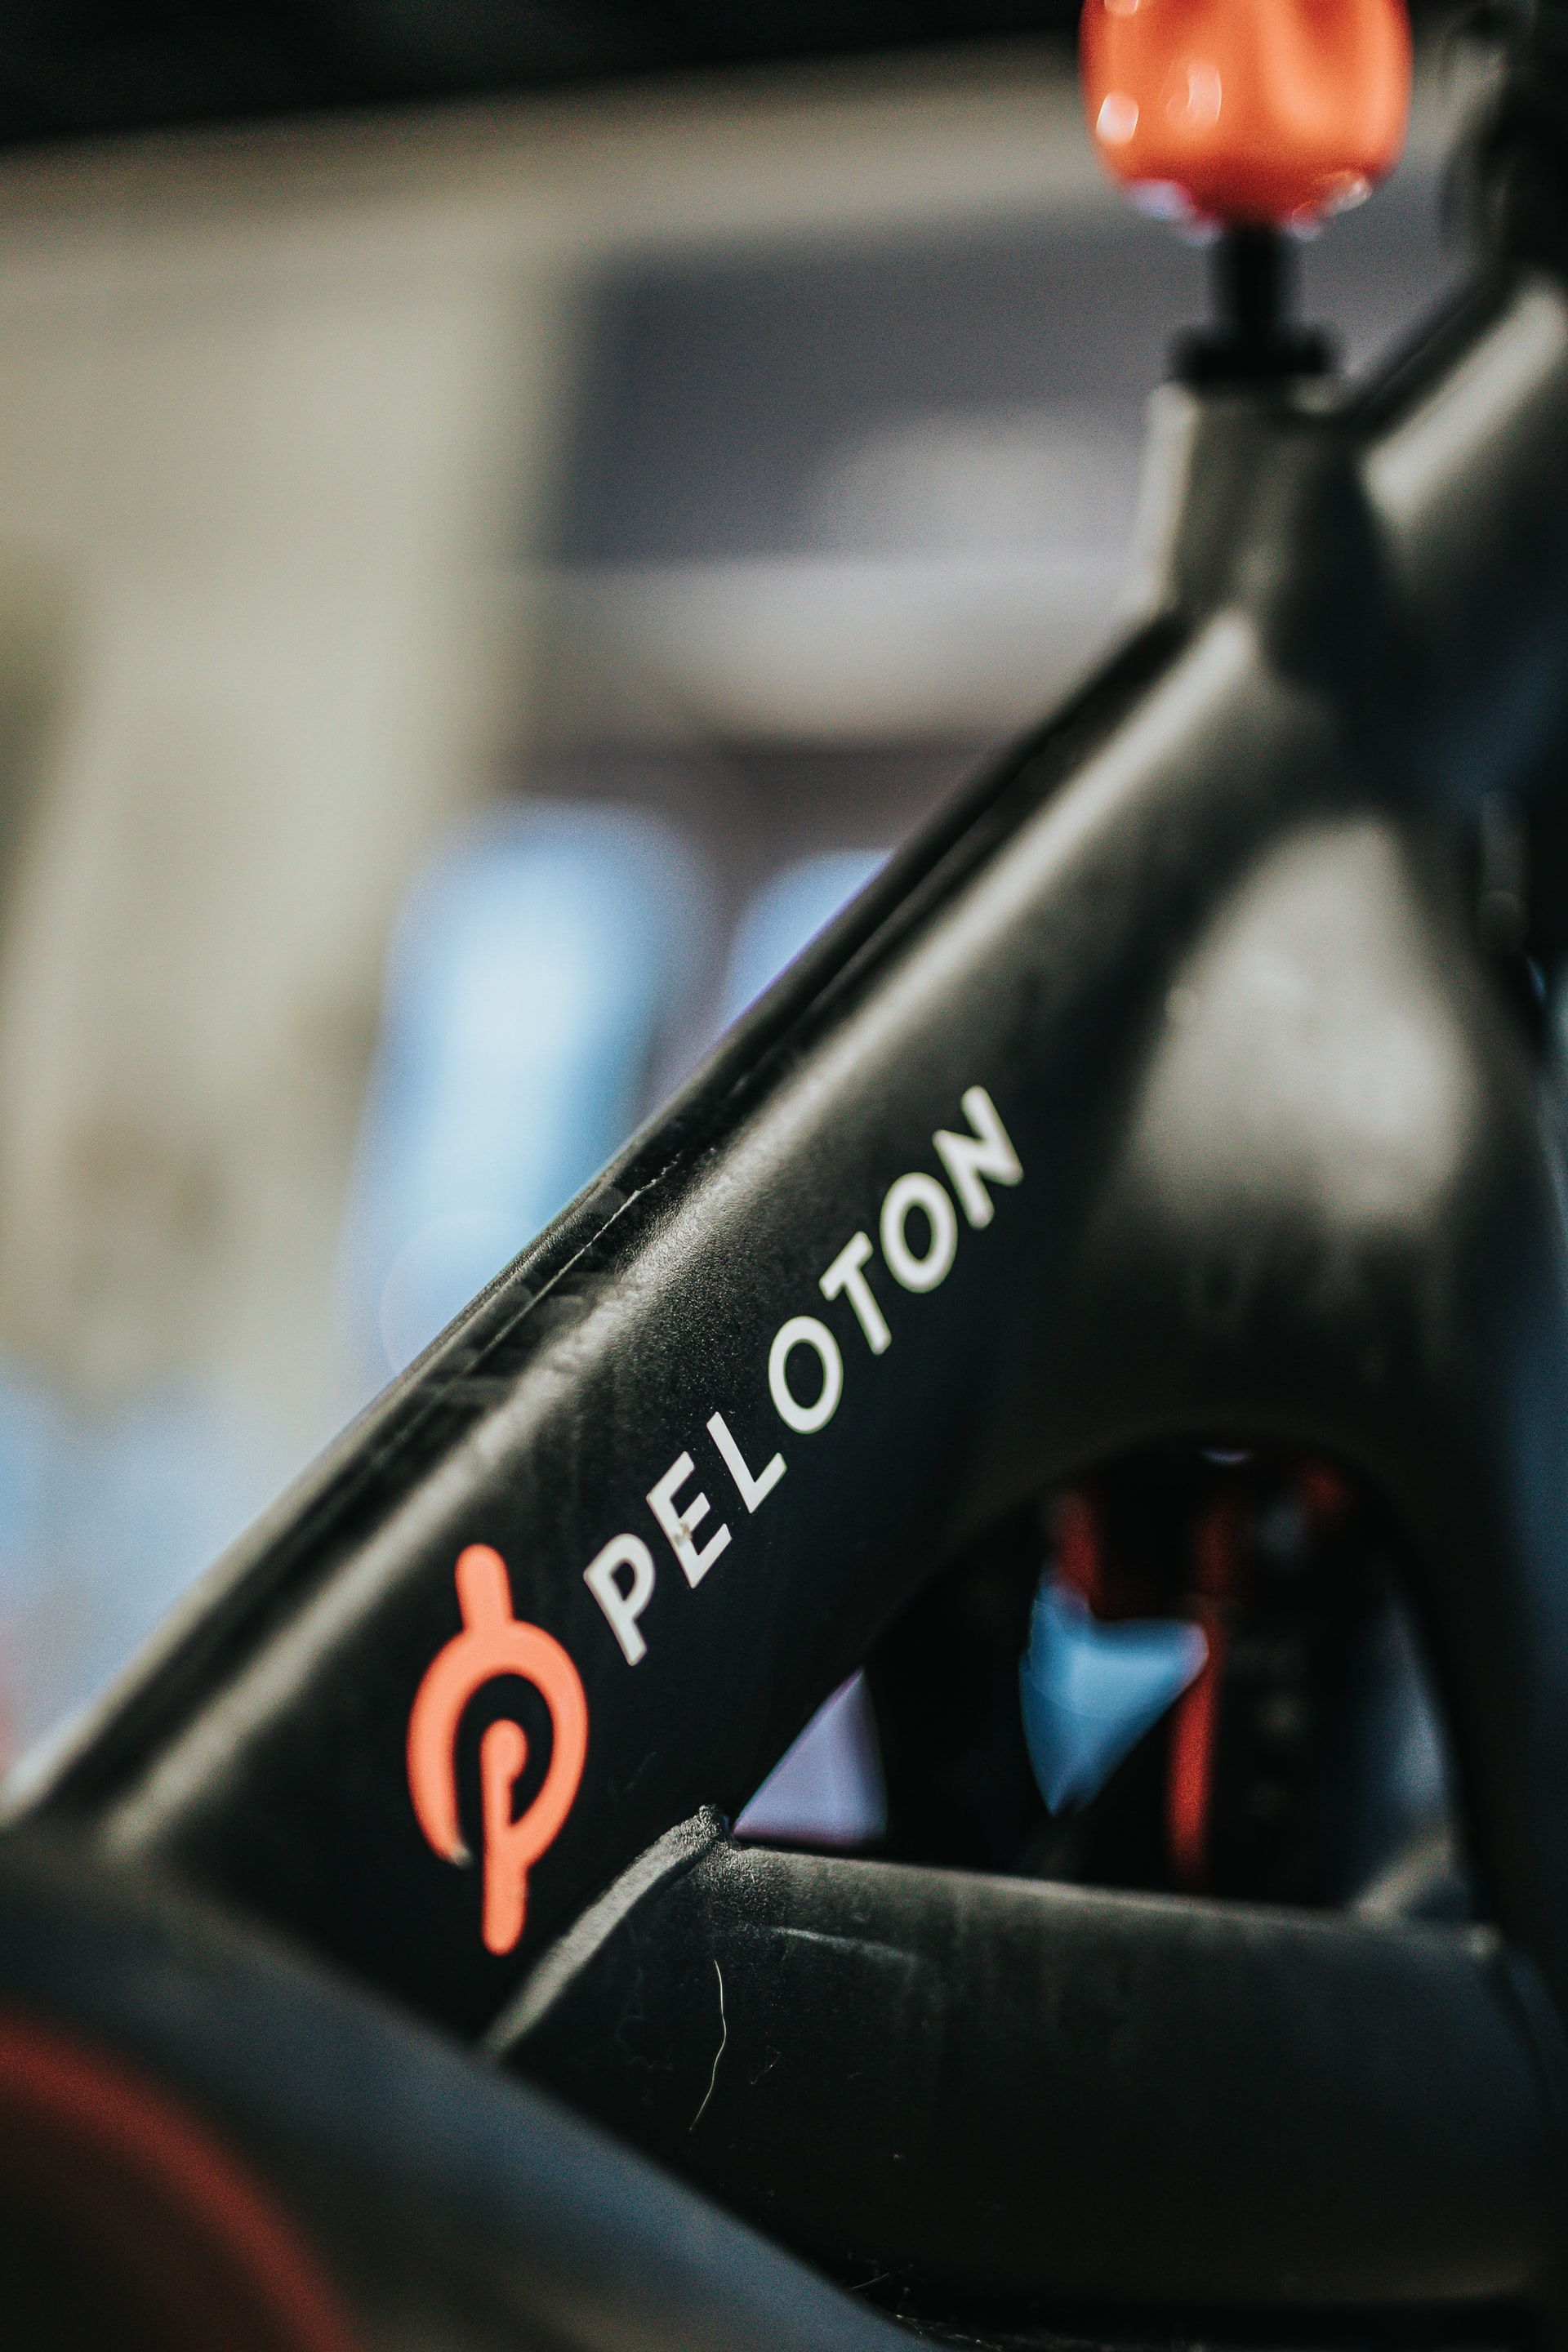 Peloton Is Updating Its Treadmills To Make Them Free To Use Again